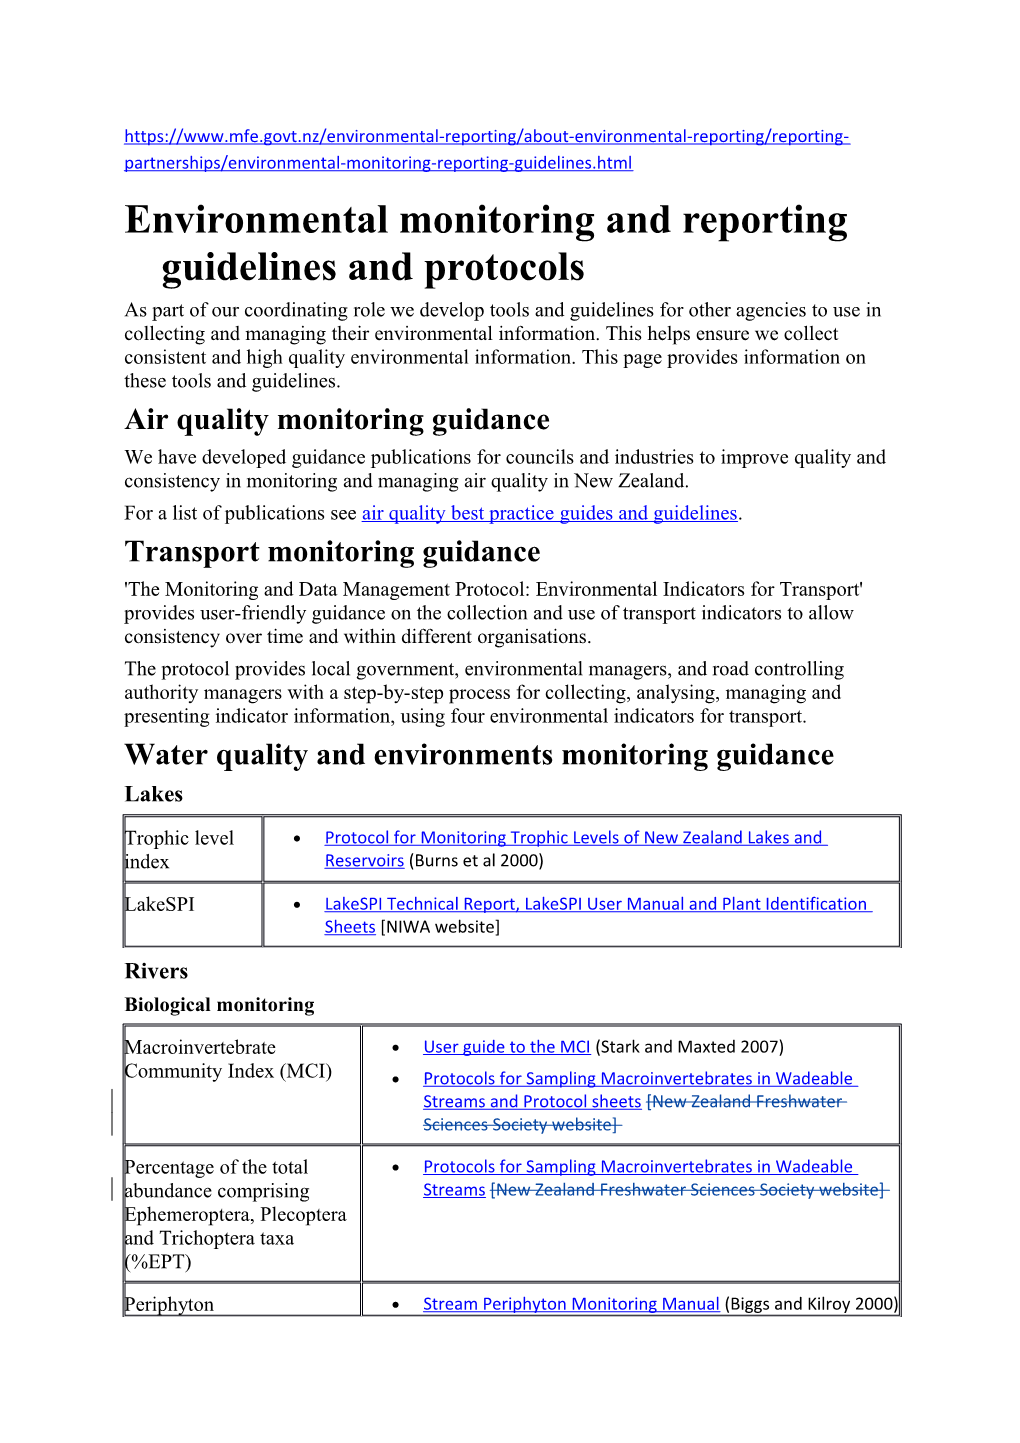 Environmental Monitoring and Reporting Guidelines and Protocols